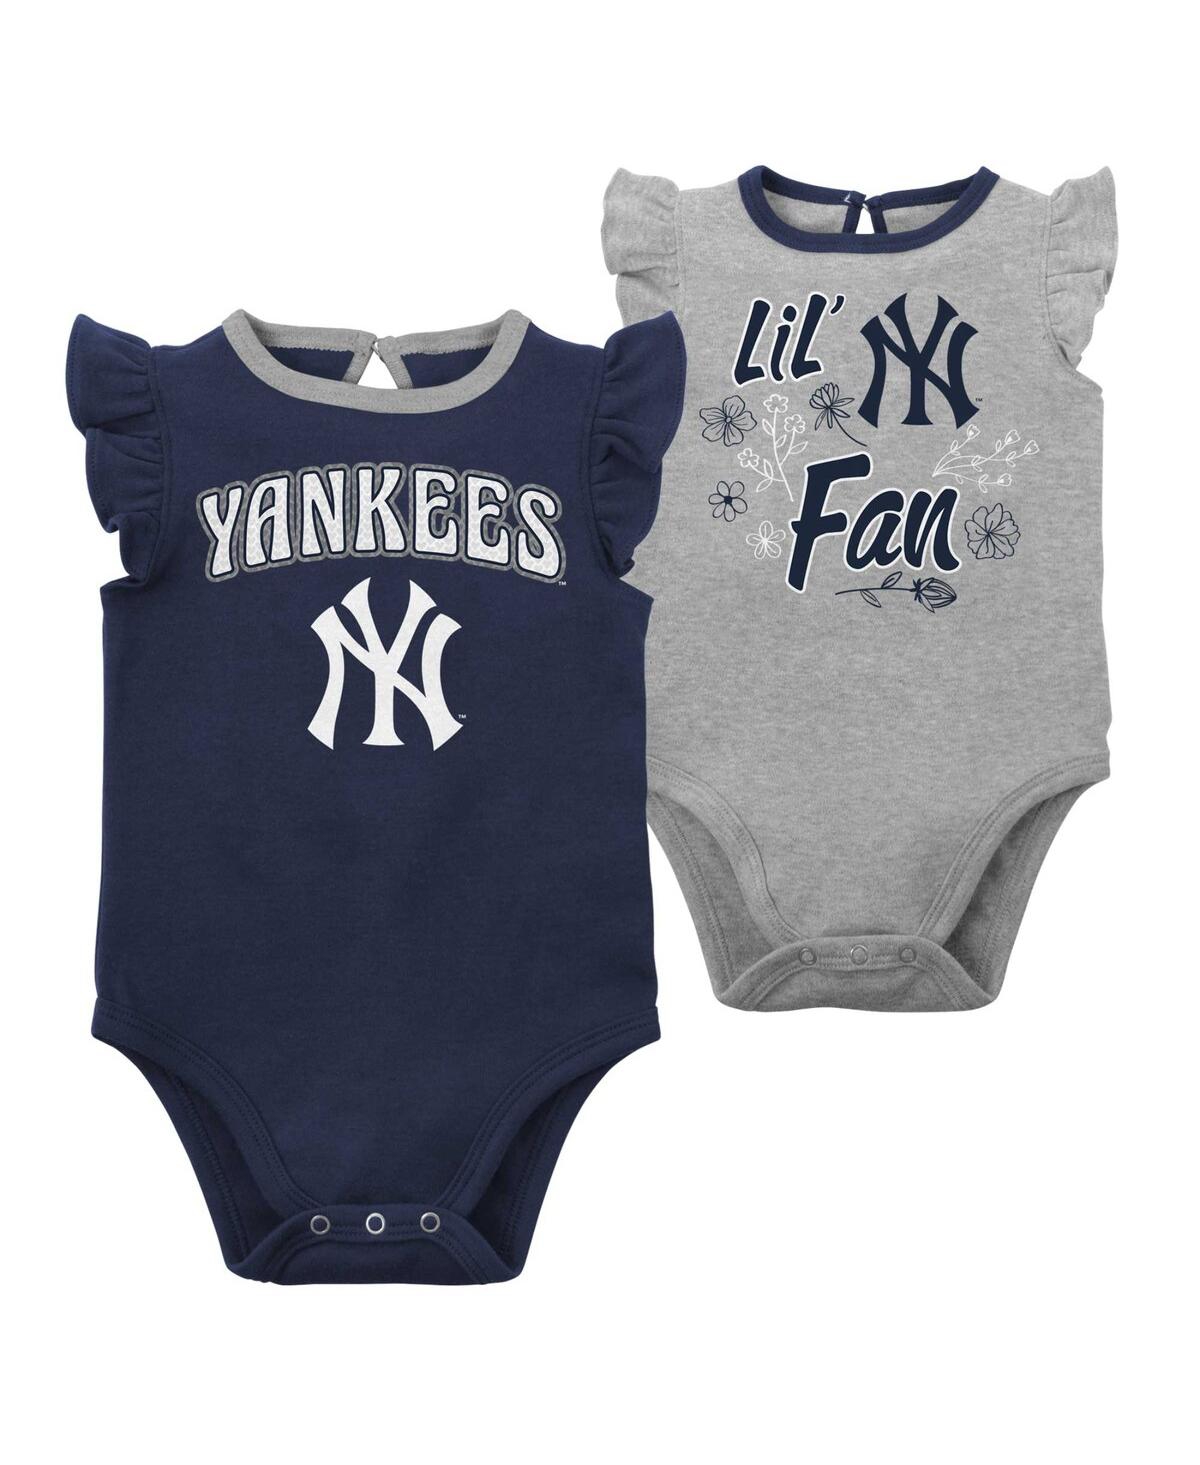 Outerstuff Babies' Newborn And Infant Boys And Girls Navy, Heather Gray New York Yankees Little Fan Two-pack Bodysuit S In Navy,heather Gray